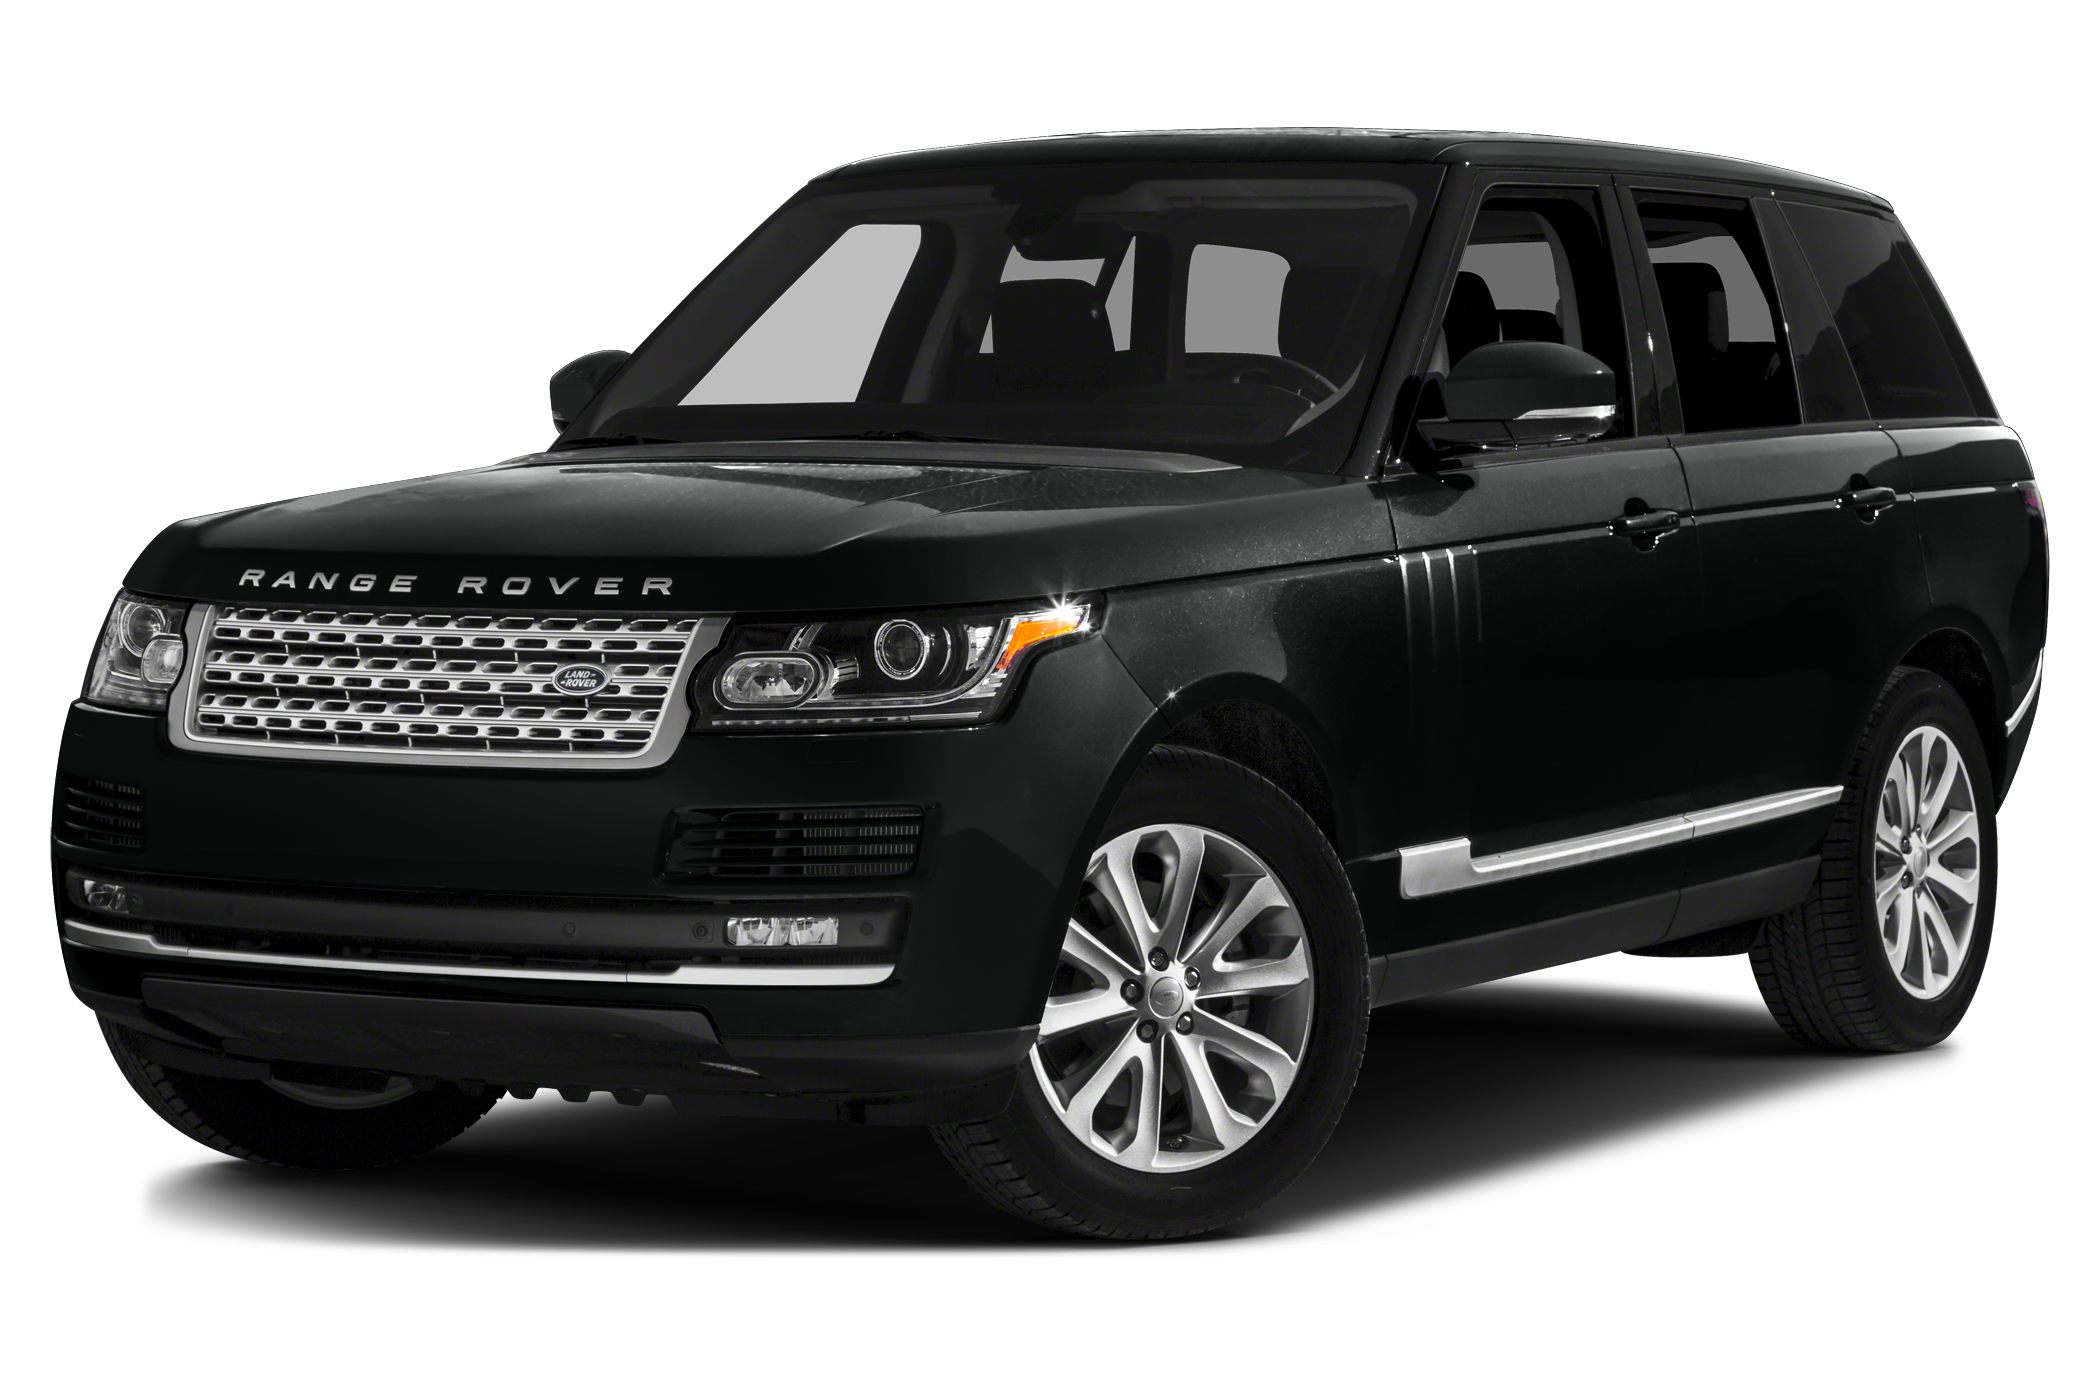 Land Rover Range Rover News, Photos and Buying Information - Autoblog